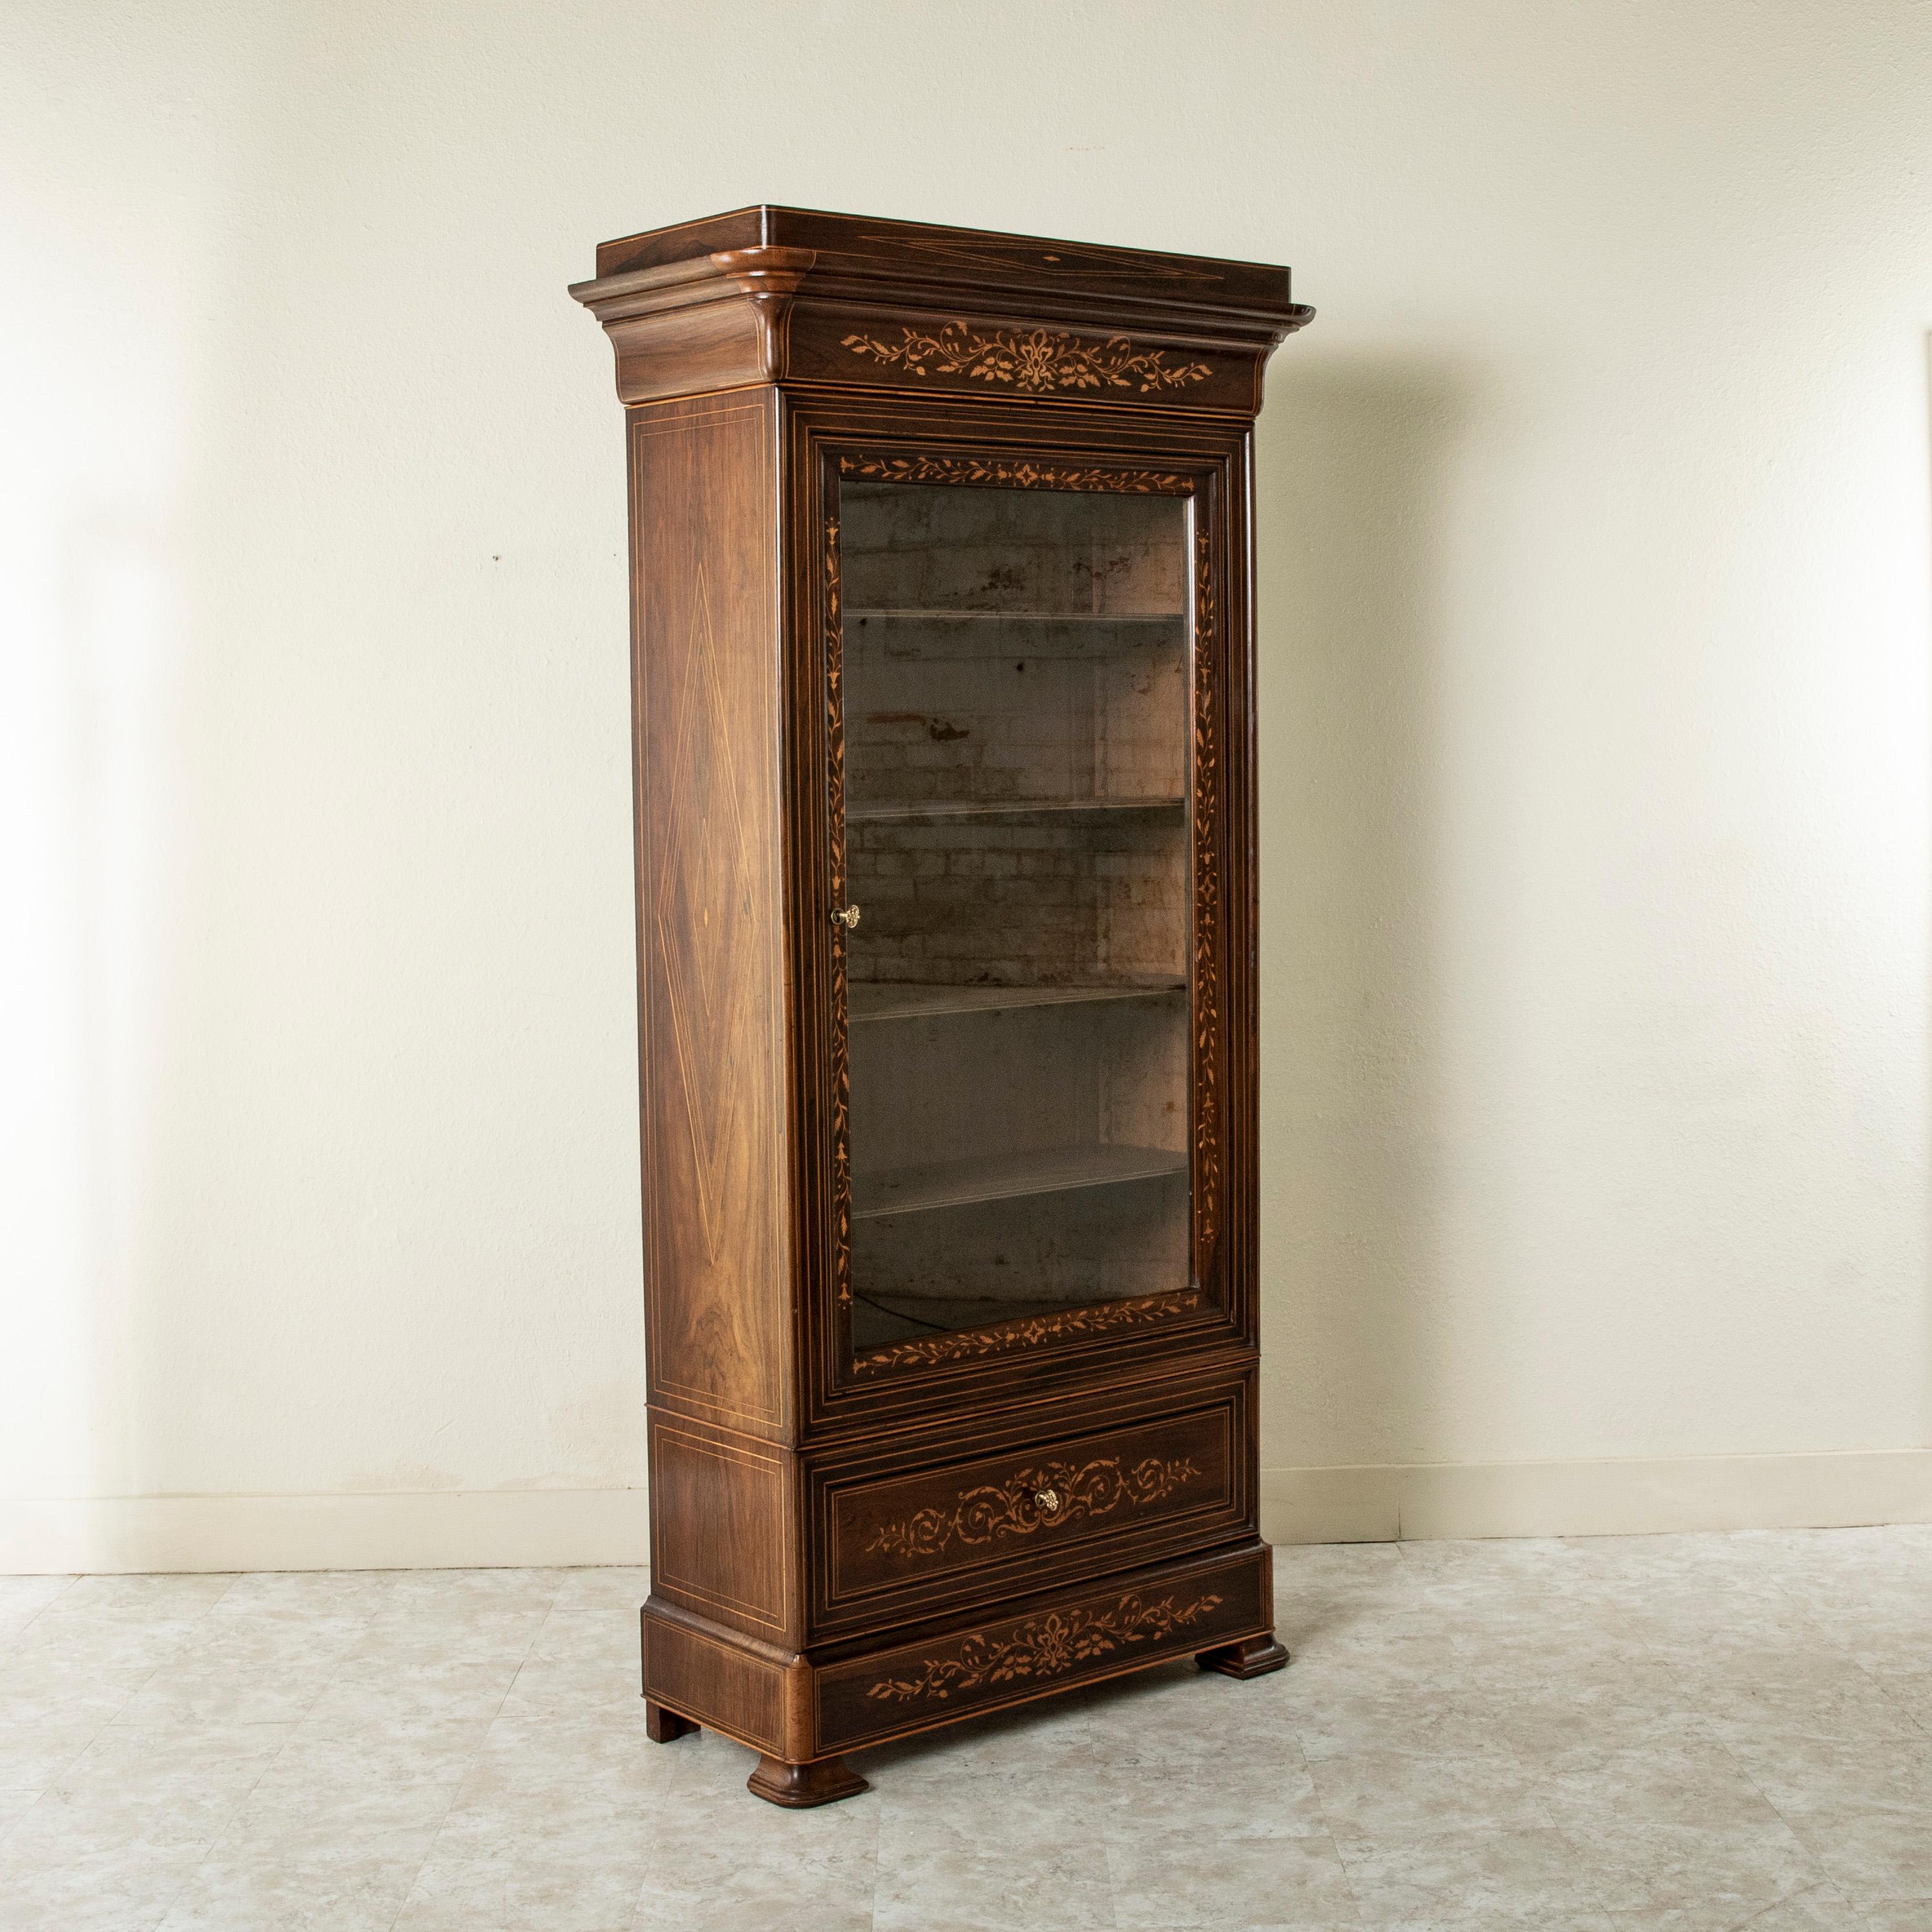 A unique piece from a short period of time in French furniture making, this early nineteenth century French Charles X period palisander vitrine or bookcase features fine lines of lemon wood inlay outlining the face and each side of the cabinet.